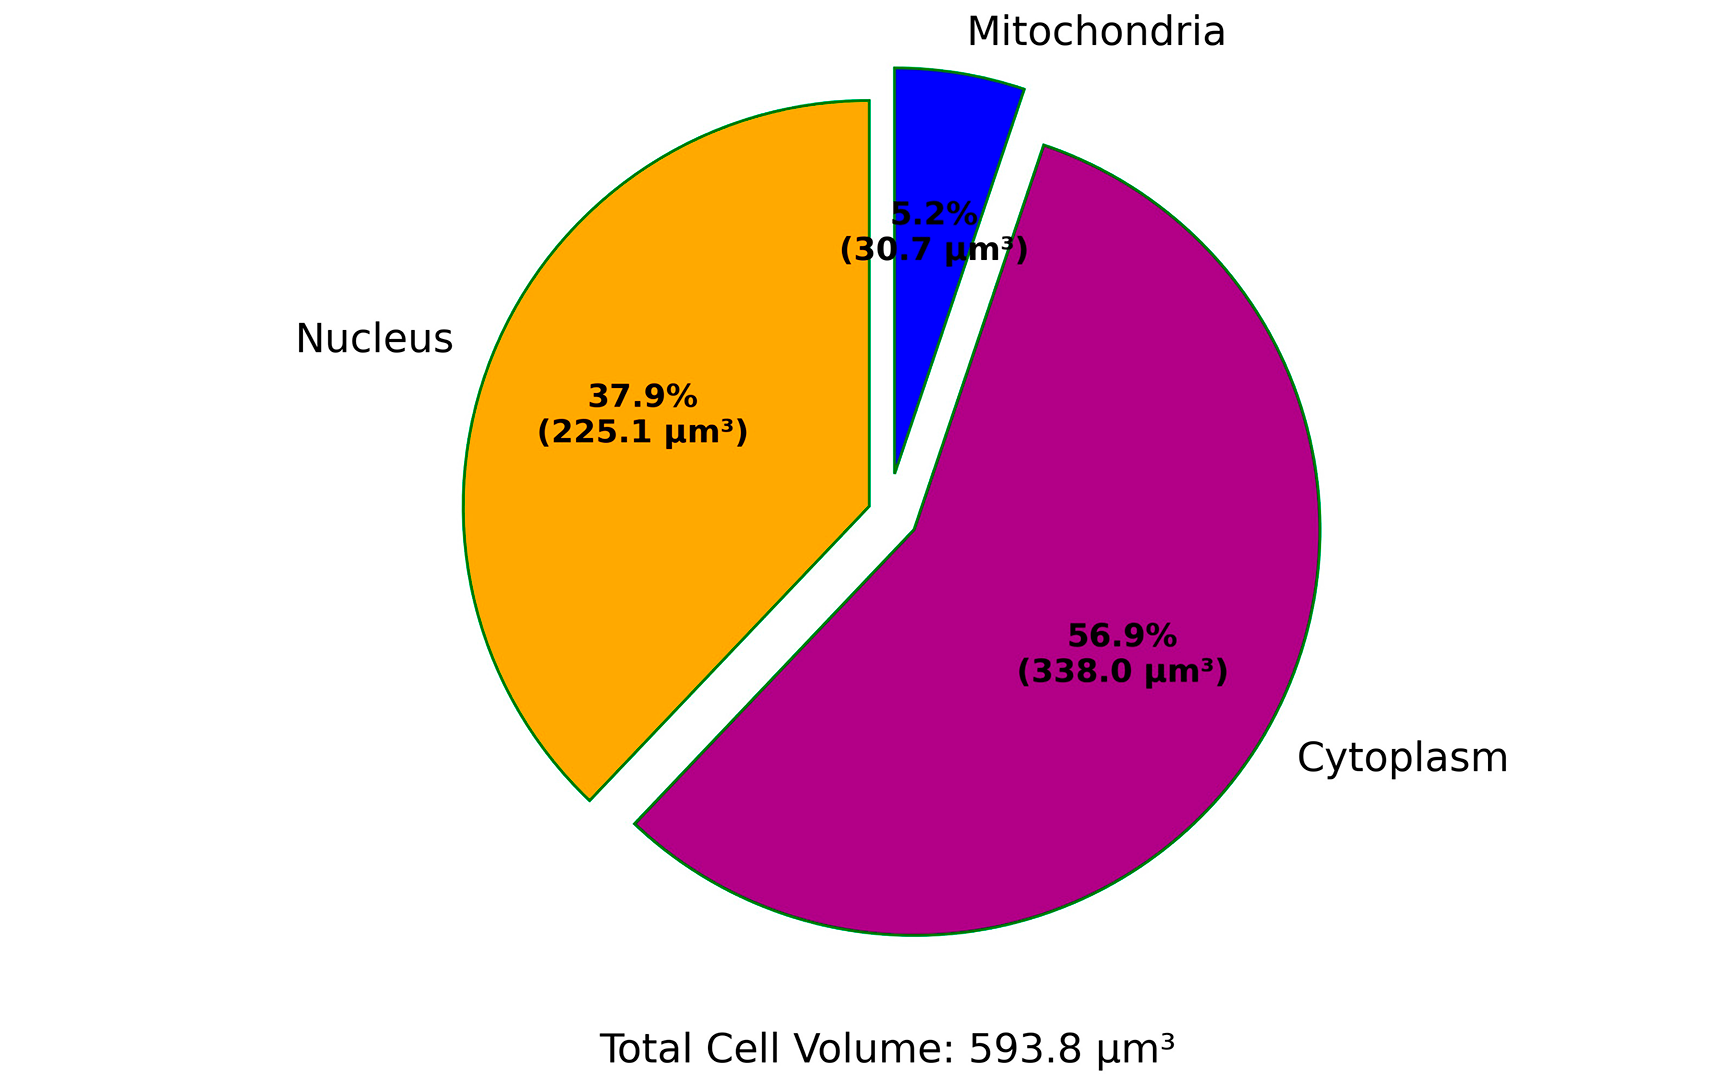 Percentages of total cell volume occupied by mitochondrial network and nucleus